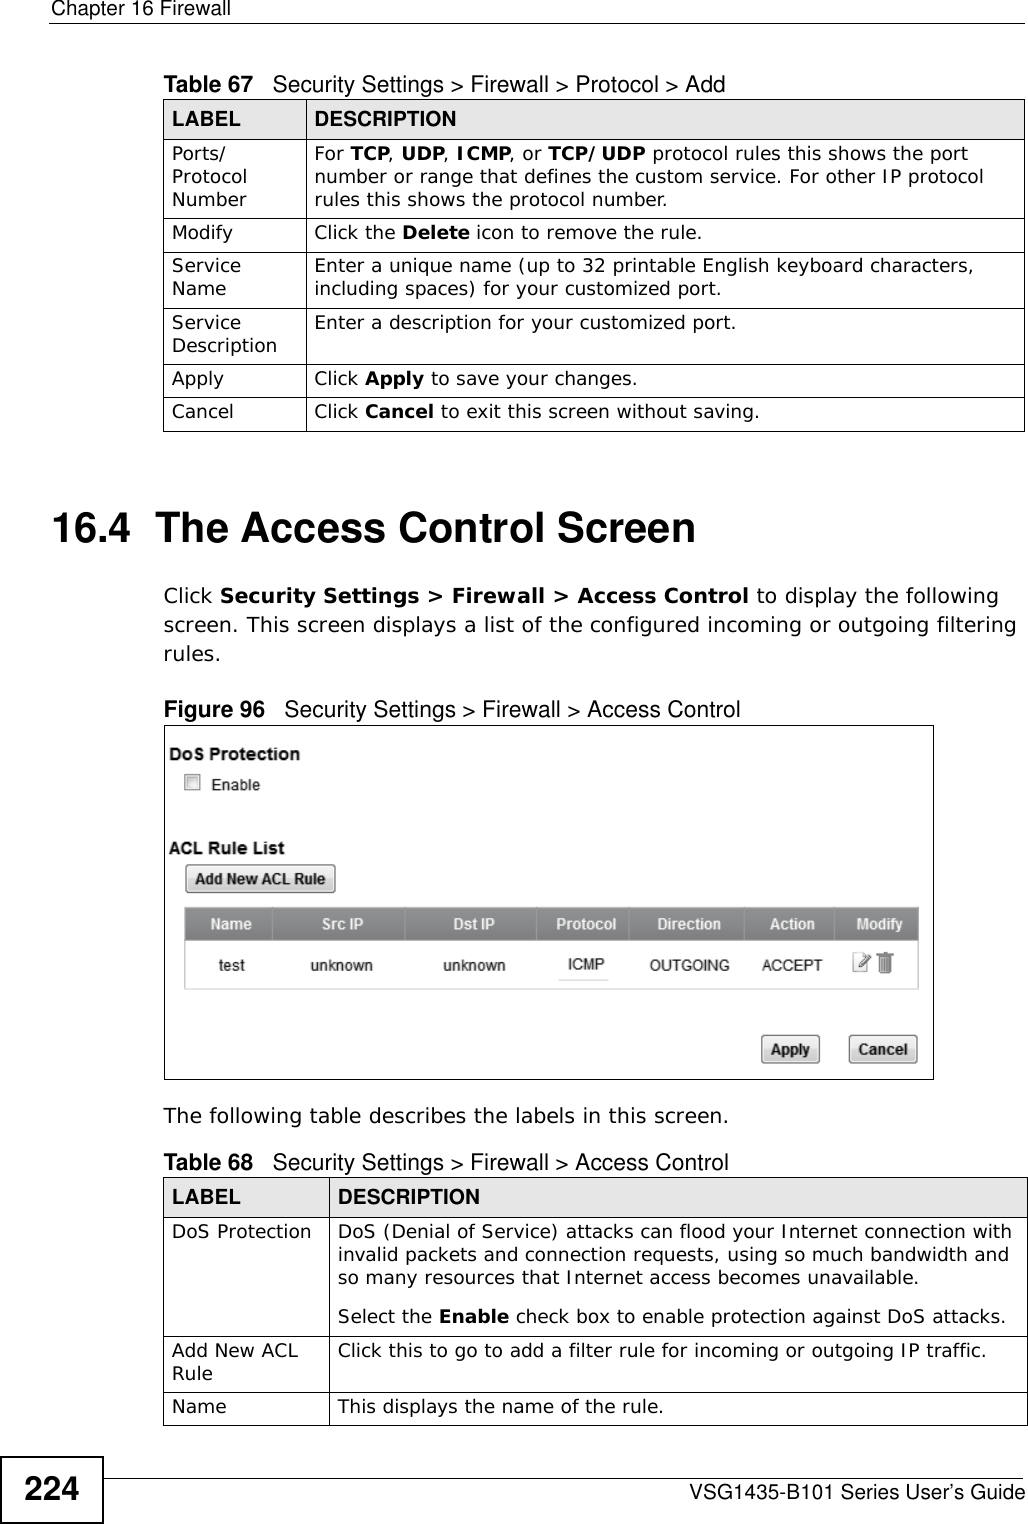 Chapter 16 FirewallVSG1435-B101 Series User’s Guide22416.4  The Access Control ScreenClick Security Settings &gt; Firewall &gt; Access Control to display the following screen. This screen displays a list of the configured incoming or outgoing filtering rules. Figure 96   Security Settings &gt; Firewall &gt; Access Control The following table describes the labels in this screen. Ports/Protocol NumberFor TCP, UDP, ICMP, or TCP/UDP protocol rules this shows the port number or range that defines the custom service. For other IP protocol rules this shows the protocol number. Modify Click the Delete icon to remove the rule.Service Name Enter a unique name (up to 32 printable English keyboard characters, including spaces) for your customized port. Service Description Enter a description for your customized port.Apply Click Apply to save your changes.Cancel Click Cancel to exit this screen without saving.Table 67   Security Settings &gt; Firewall &gt; Protocol &gt; AddLABEL DESCRIPTIONTable 68   Security Settings &gt; Firewall &gt; Access ControlLABEL DESCRIPTIONDoS Protection DoS (Denial of Service) attacks can flood your Internet connection with invalid packets and connection requests, using so much bandwidth and so many resources that Internet access becomes unavailable. Select the Enable check box to enable protection against DoS attacks.Add New ACL Rule Click this to go to add a filter rule for incoming or outgoing IP traffic.Name This displays the name of the rule.